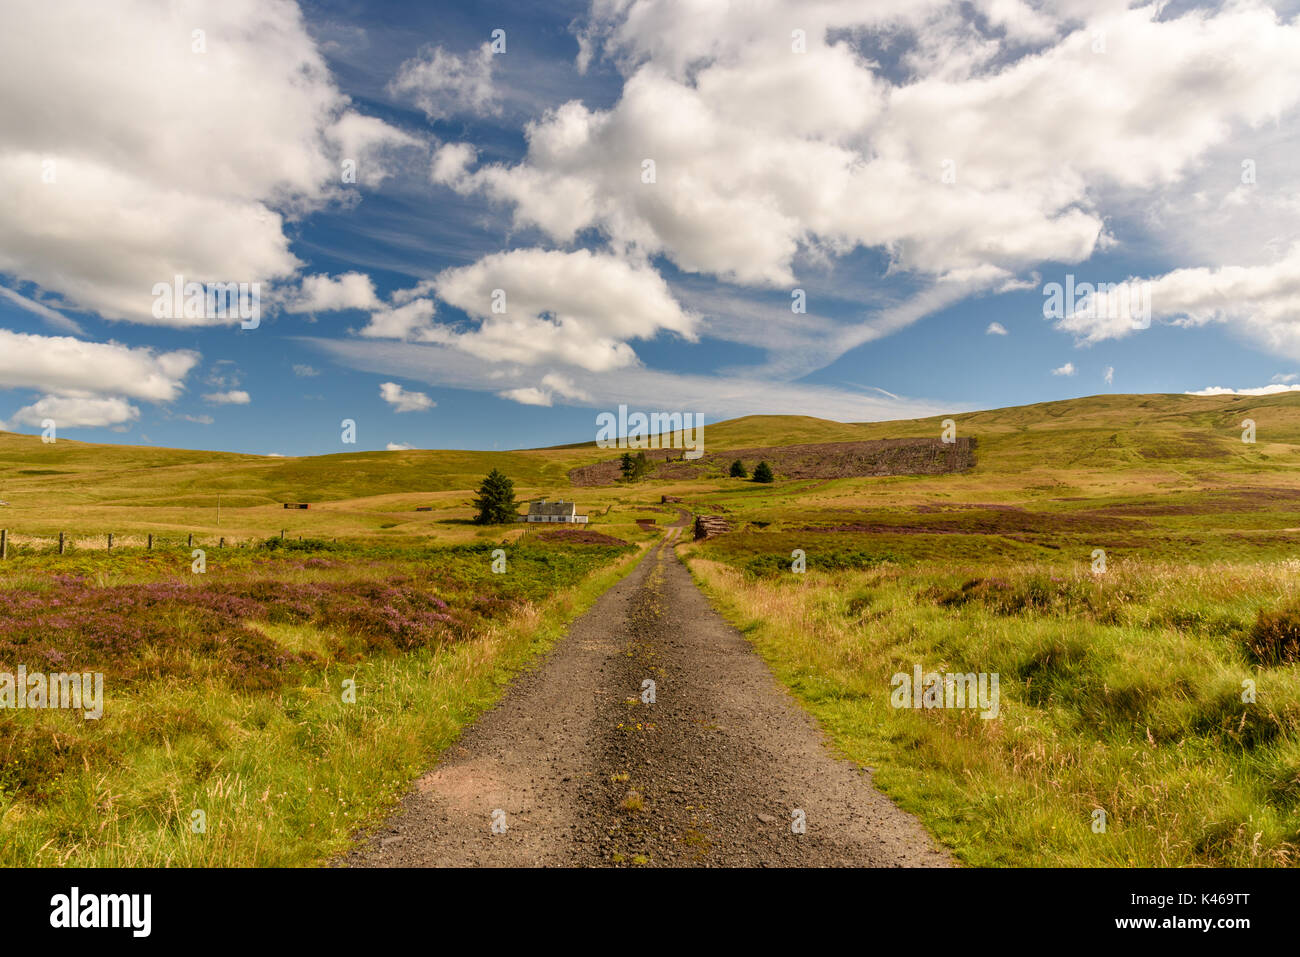 STIRLING, UNITED KINGDOM - AUGUST 9, 2017 - A dirt road near the Cairngorms National Park in Scotland with a house alone in the middle of a field. Stock Photo